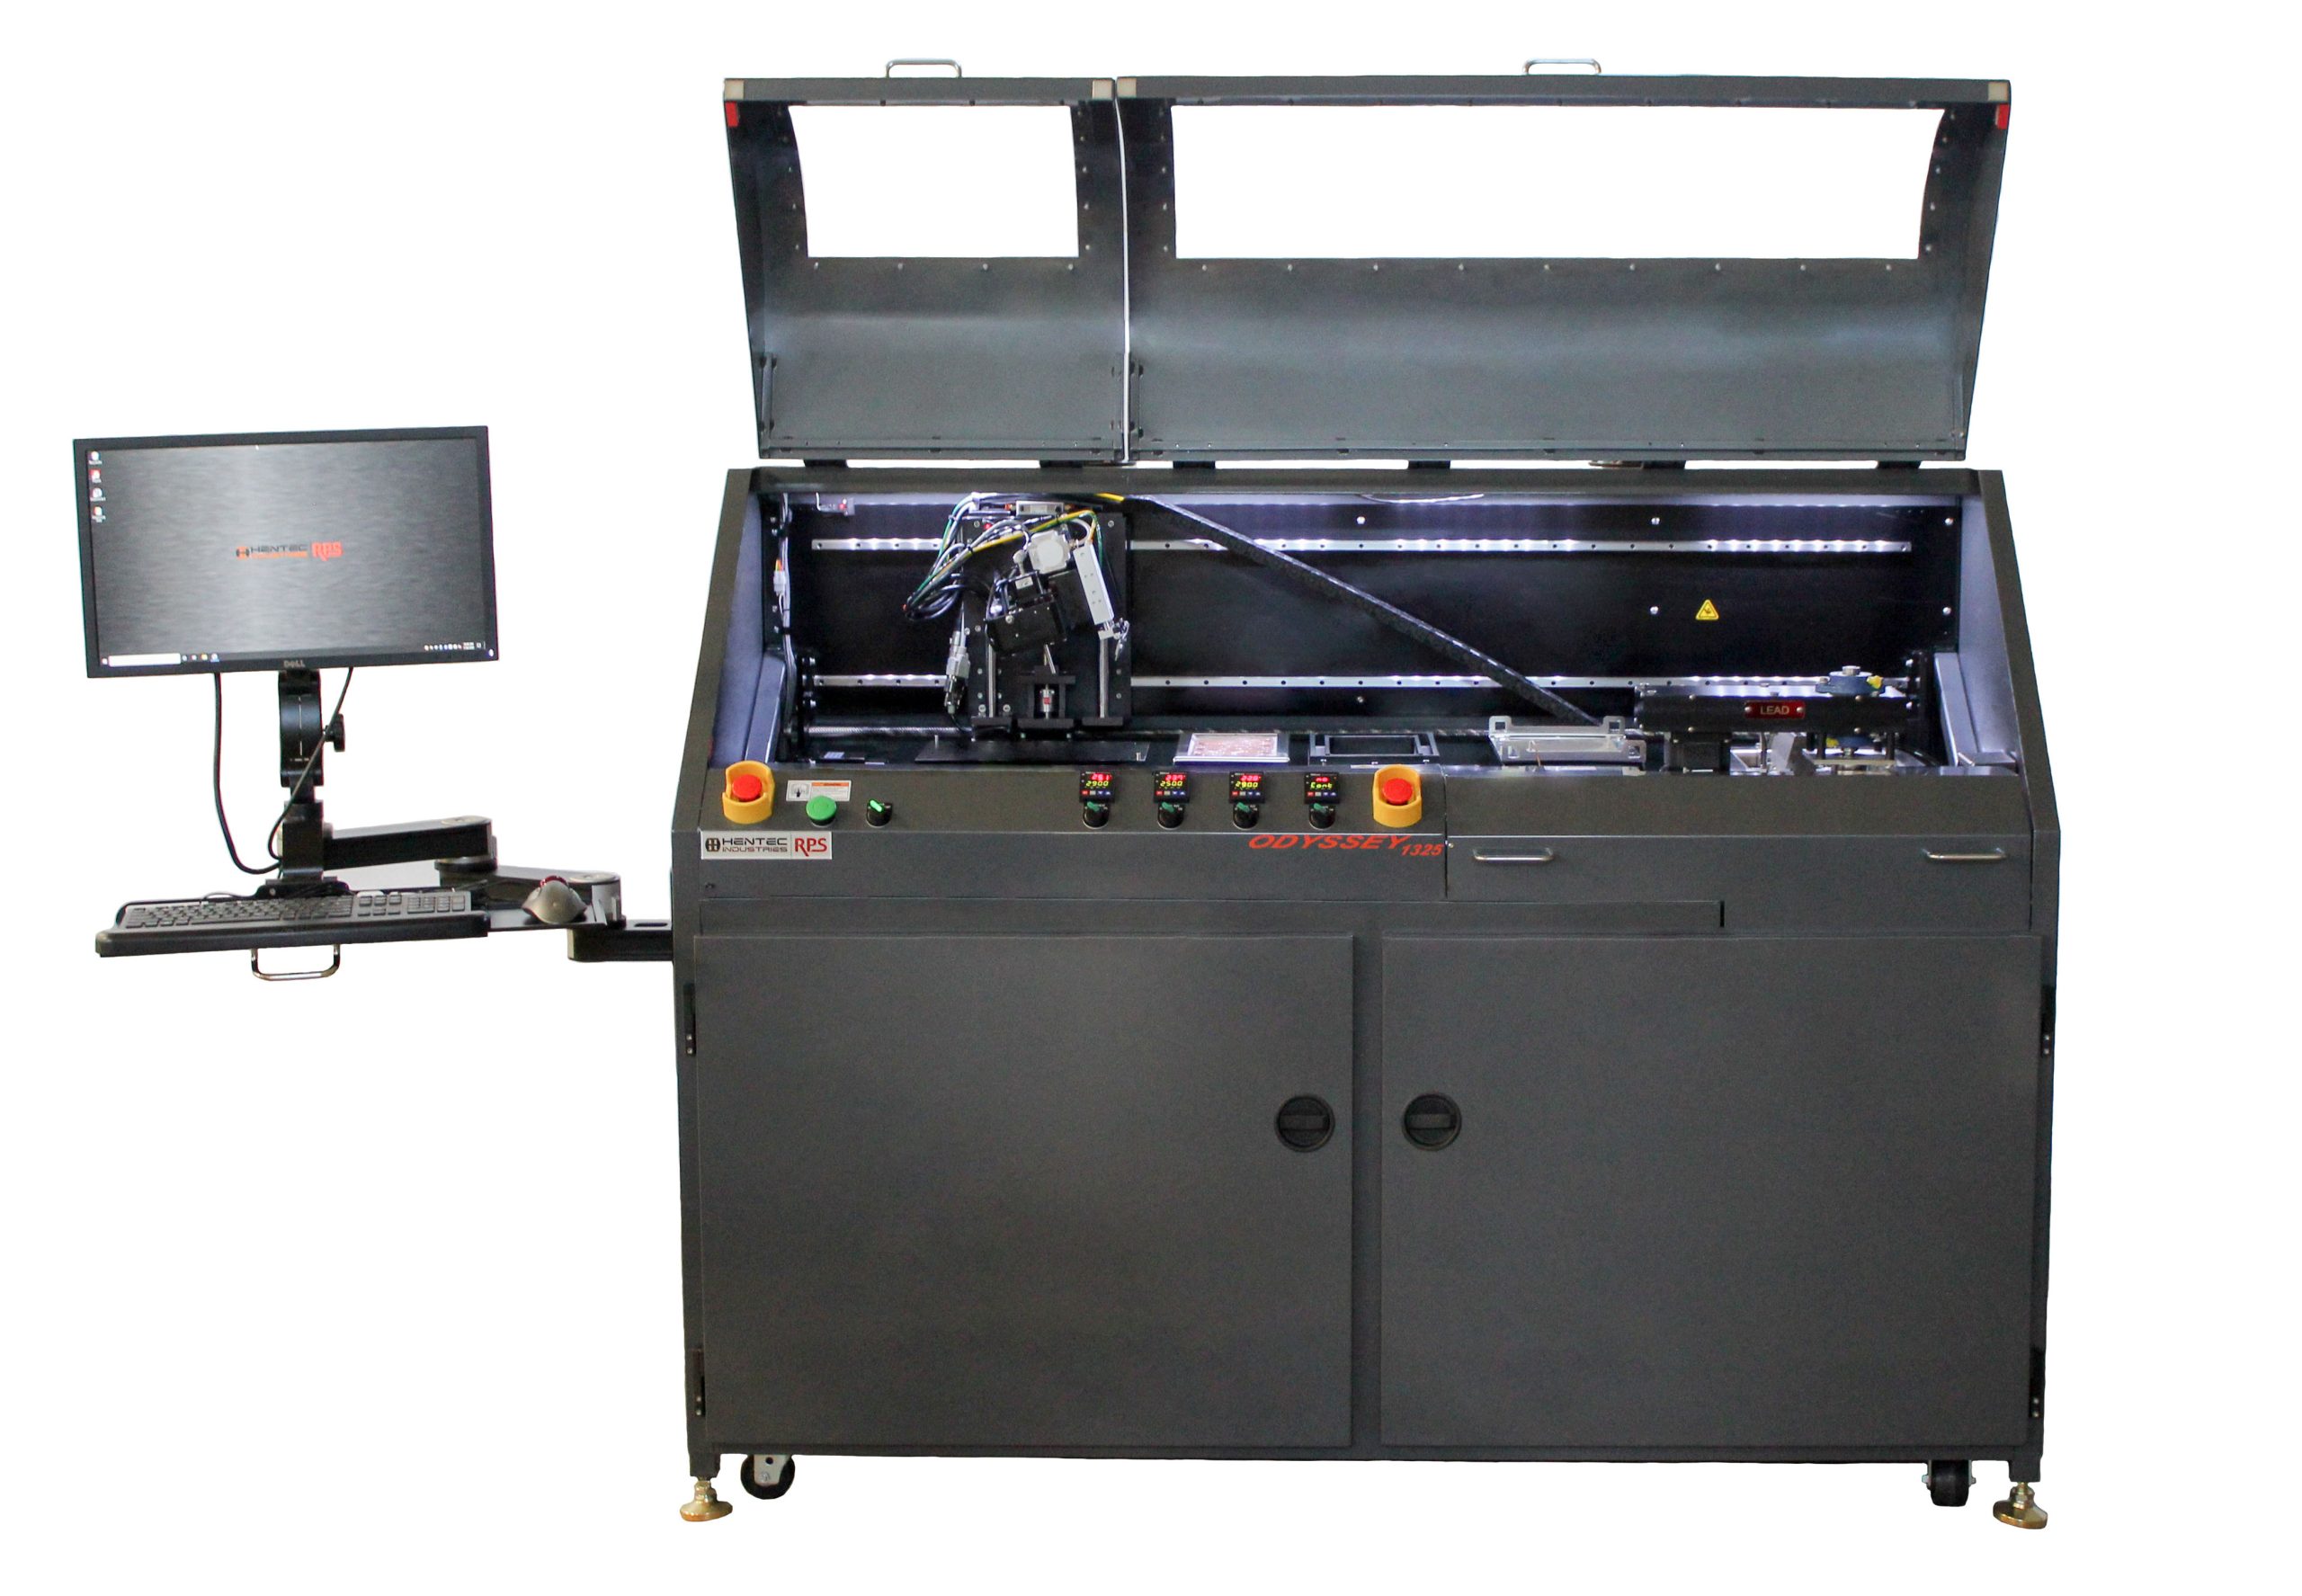 Tyvak Nano Satellite Completes Purchase of Hentec/RPS Odyssey 1325 Lead Tinning System